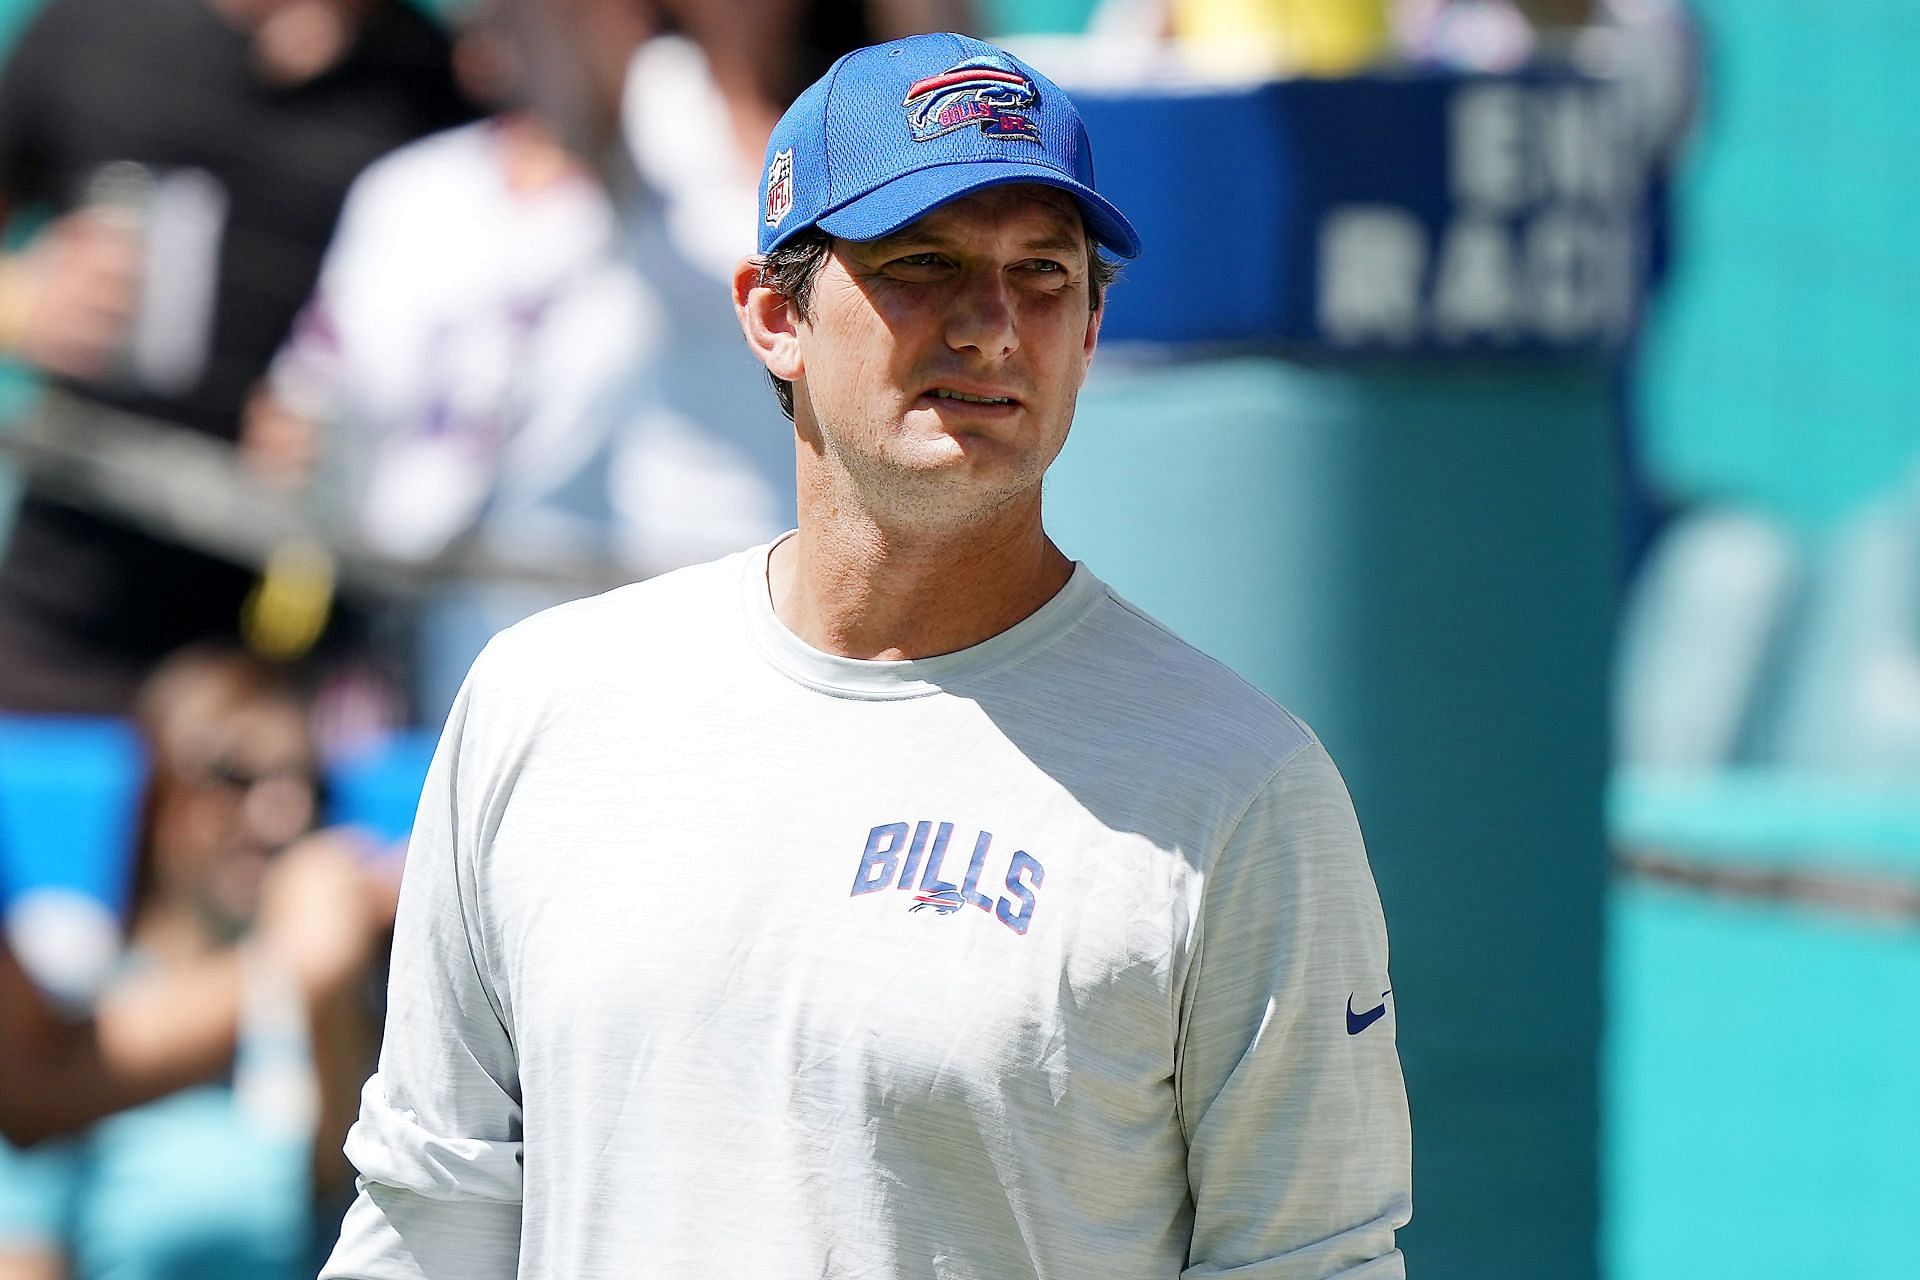 Buffalo Bills offensive coordinator Ken Dorsey looks on during warm-ups before the game against the Miami Dolphins at Hard Rock Stadium on September 25, 2022, in Miami Gardens, Florida.